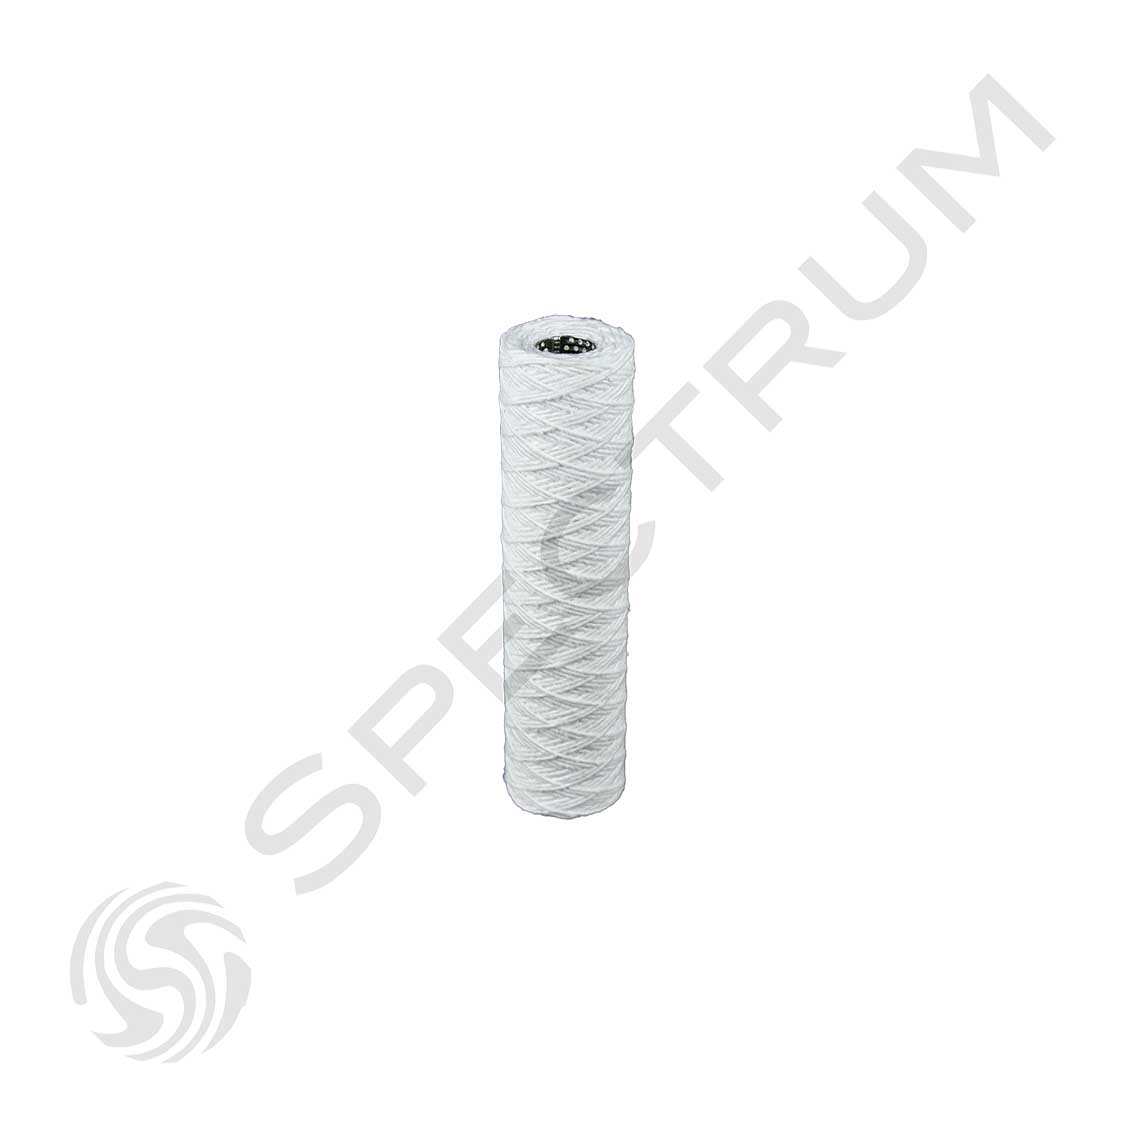 SPECTRUM SWC-150-10 Wound Cotton Filter Cartridge with Stainless Steel Core  150 micron  10